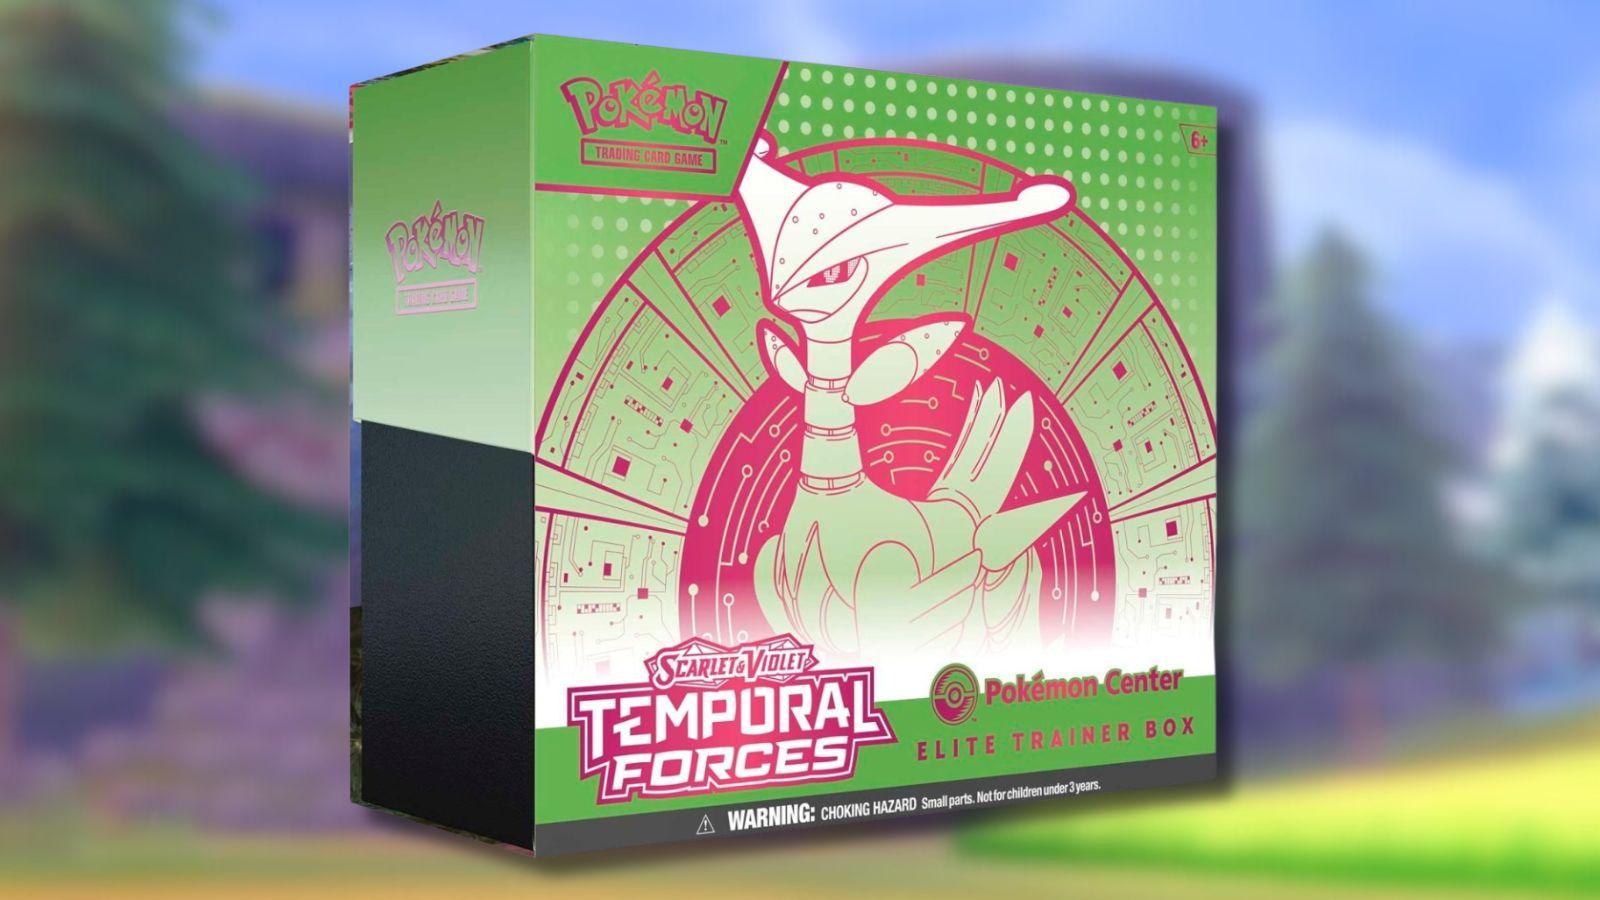 Pokemon Temporal Forces ETB with game background.